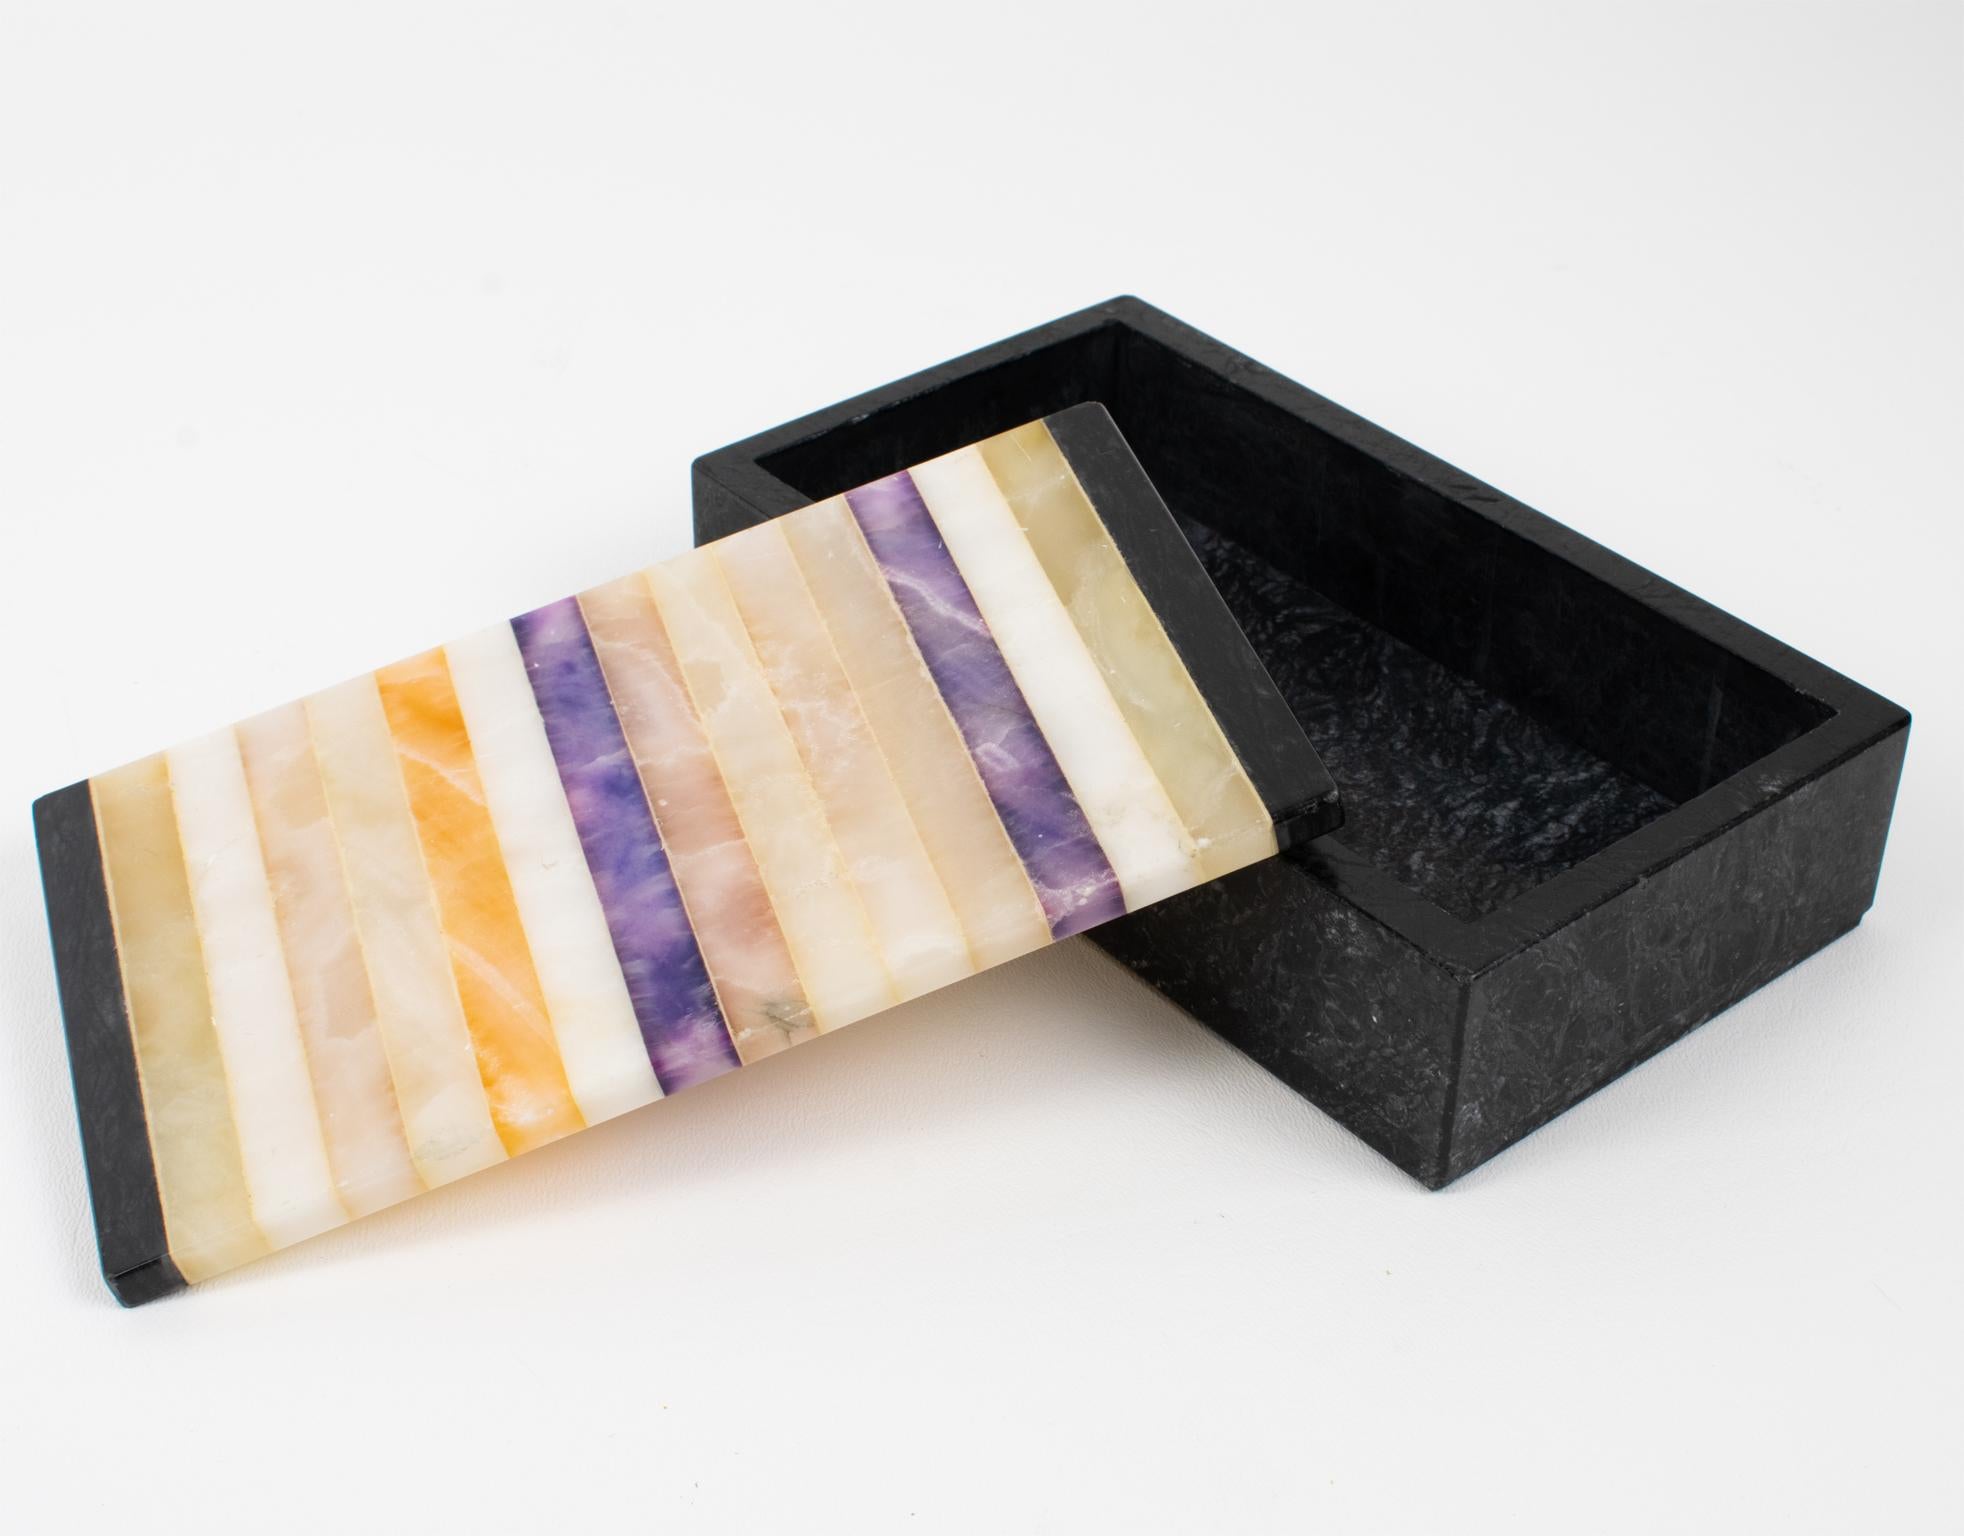 Mid-Century Marble, Onyx Marquetry Desk Set Box, Pen Holder, Ruler, Italy 1960s For Sale 3